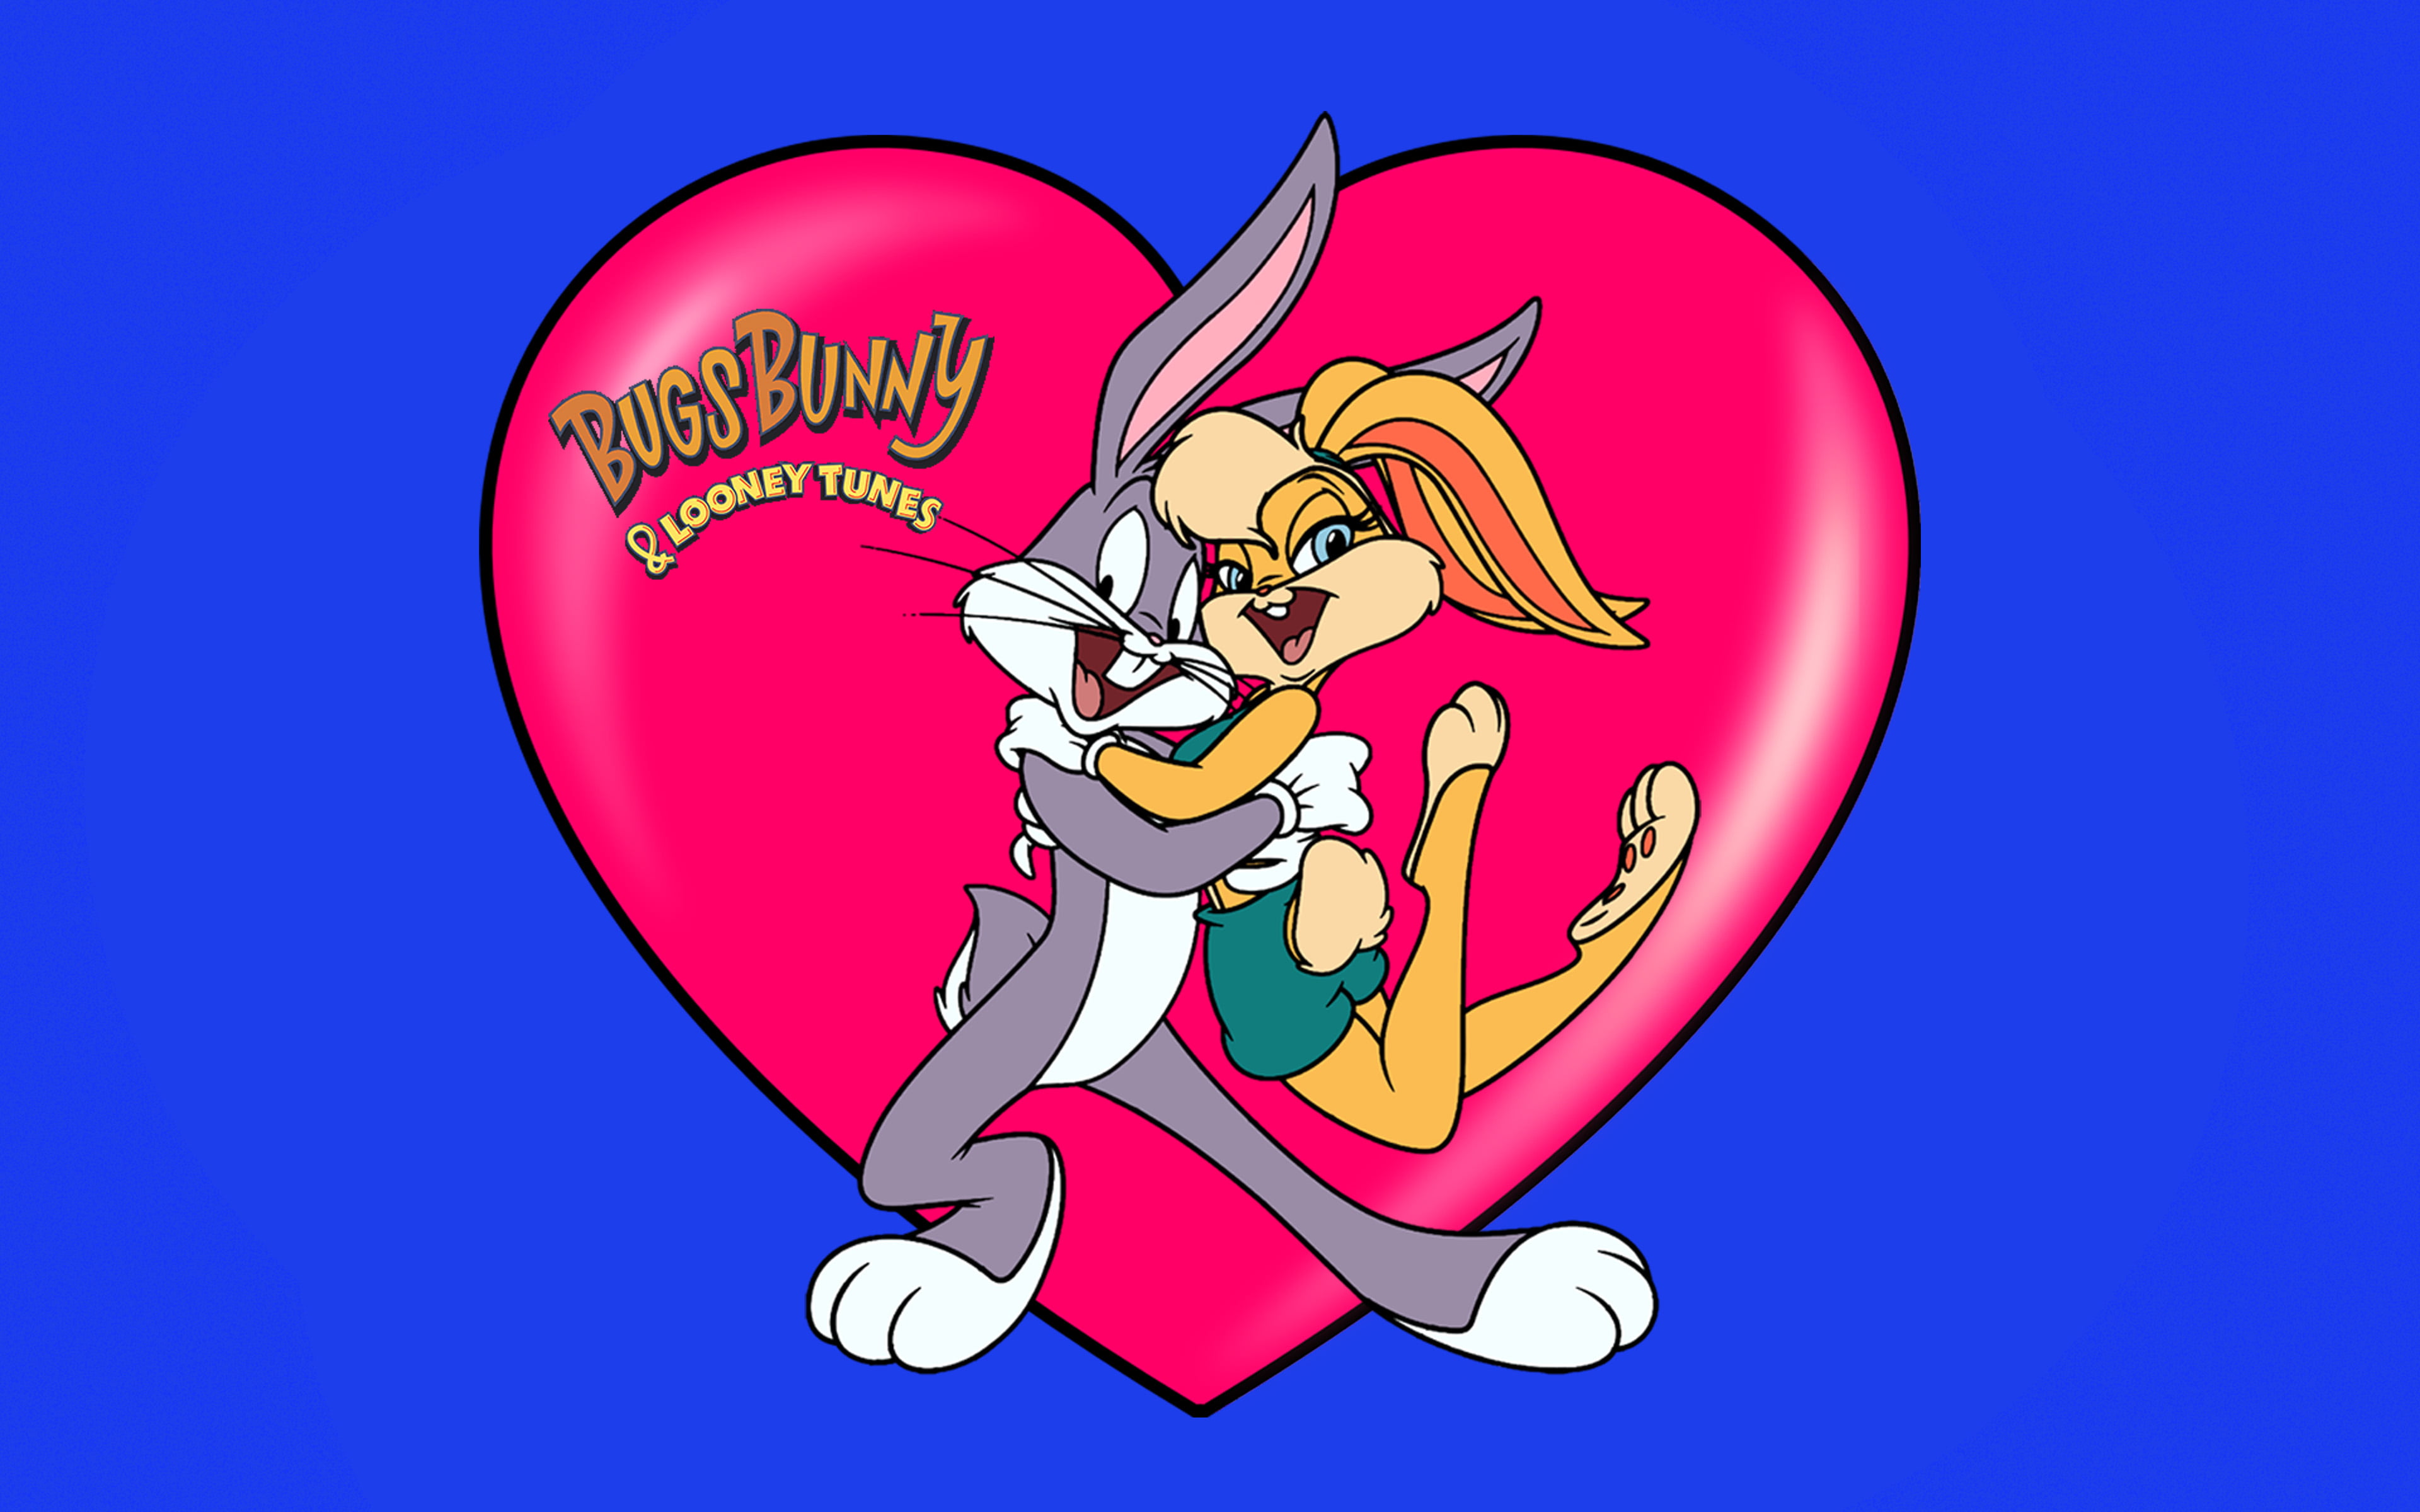 Looney Tunes Bugs Bunny And Lola Bunny Post Card Desktop Wallpaper Backgrounds For Mobile Phones Tablet And Pc 3840×2400